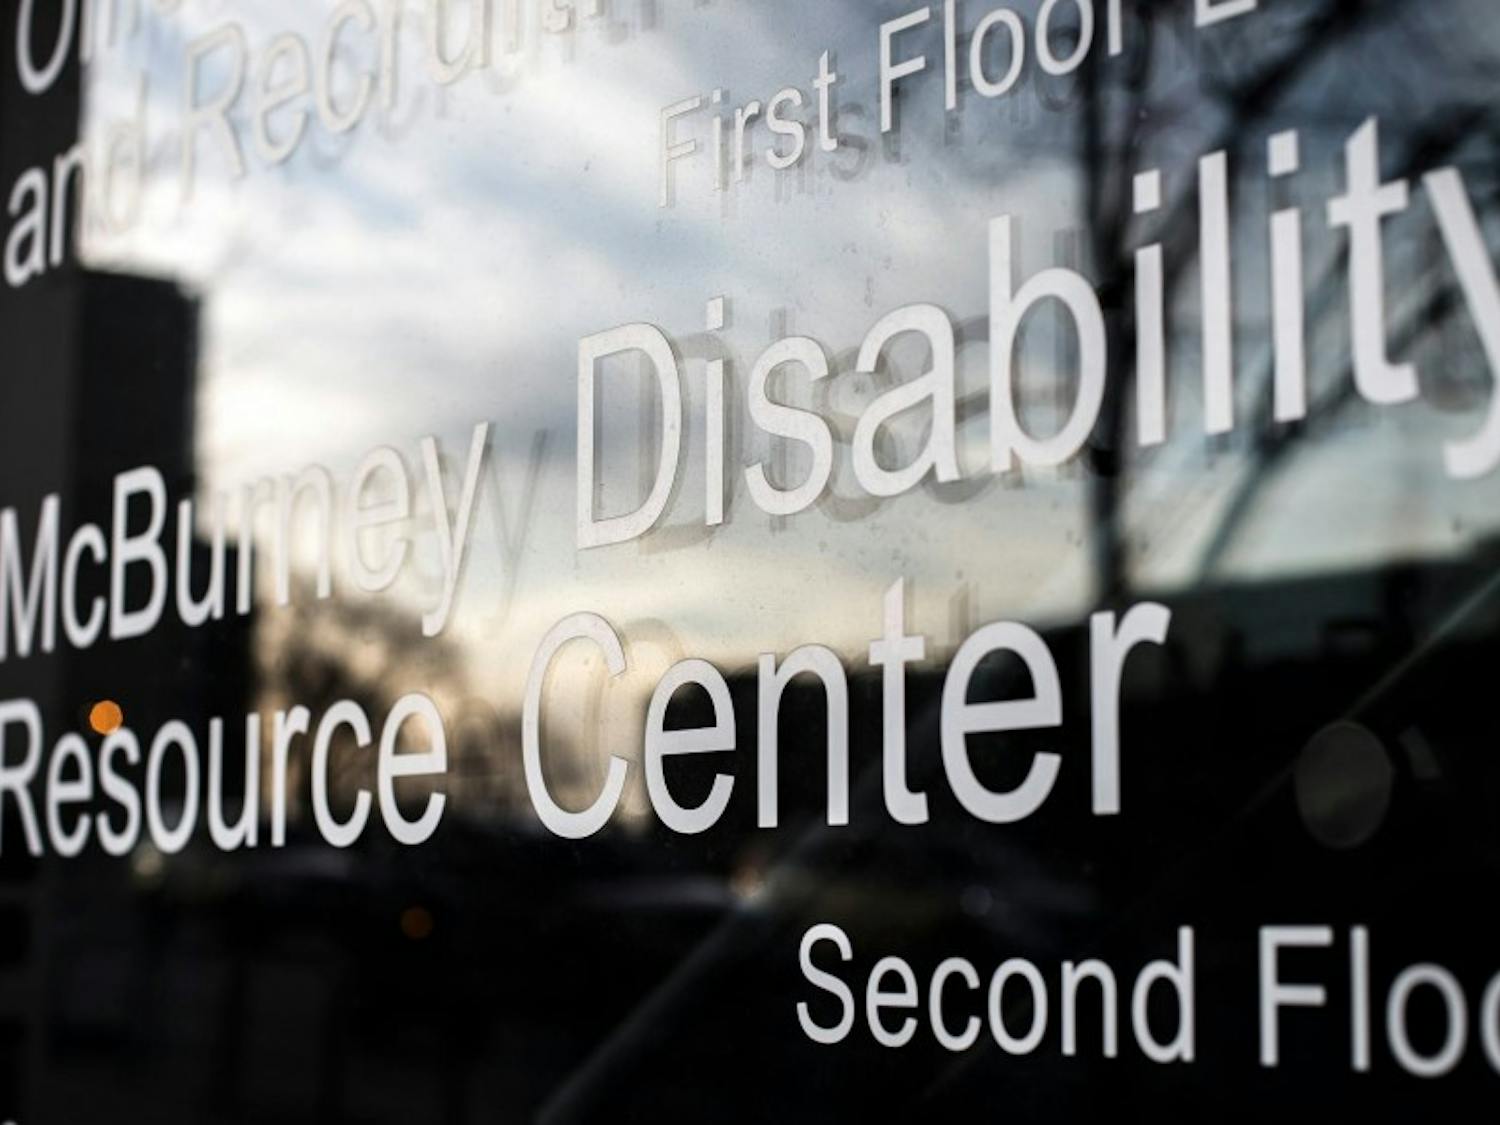 The McBurney Disability Resource Center&nbsp;is a little-known outlet that provides assistance to students with mental illnesses.&nbsp;